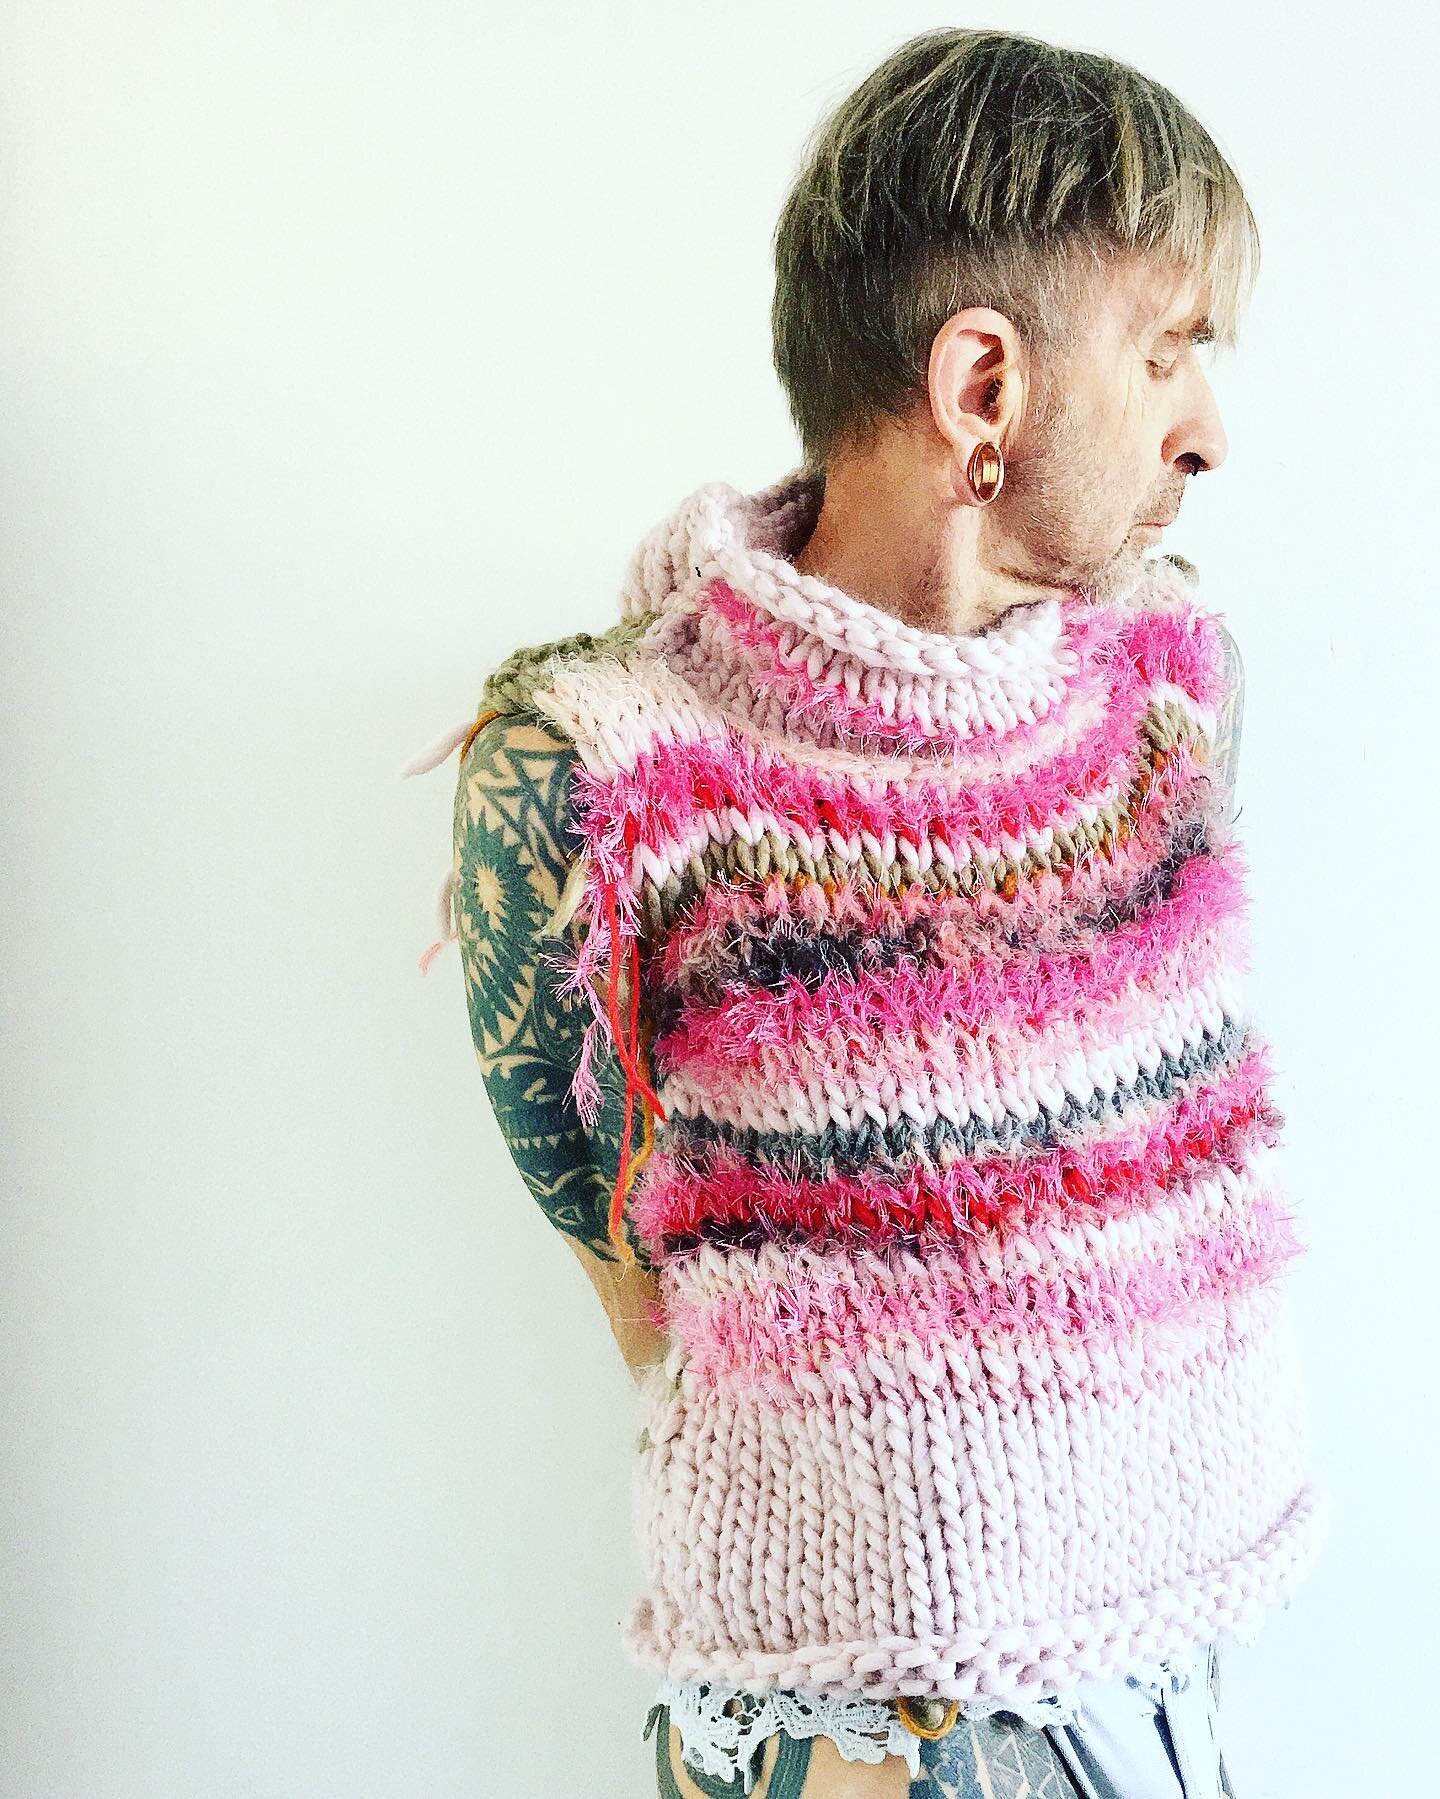 pink is
knit number eight
#knitting #knitter #knittersofinstagram #pink #sweater #winterisgone #spring #lifeispink #color #colorstudy #artist #pose #strikeapose #knittingguy #knittinggay #gay #queer #queerart #artproject #queerartprojects #masculinit